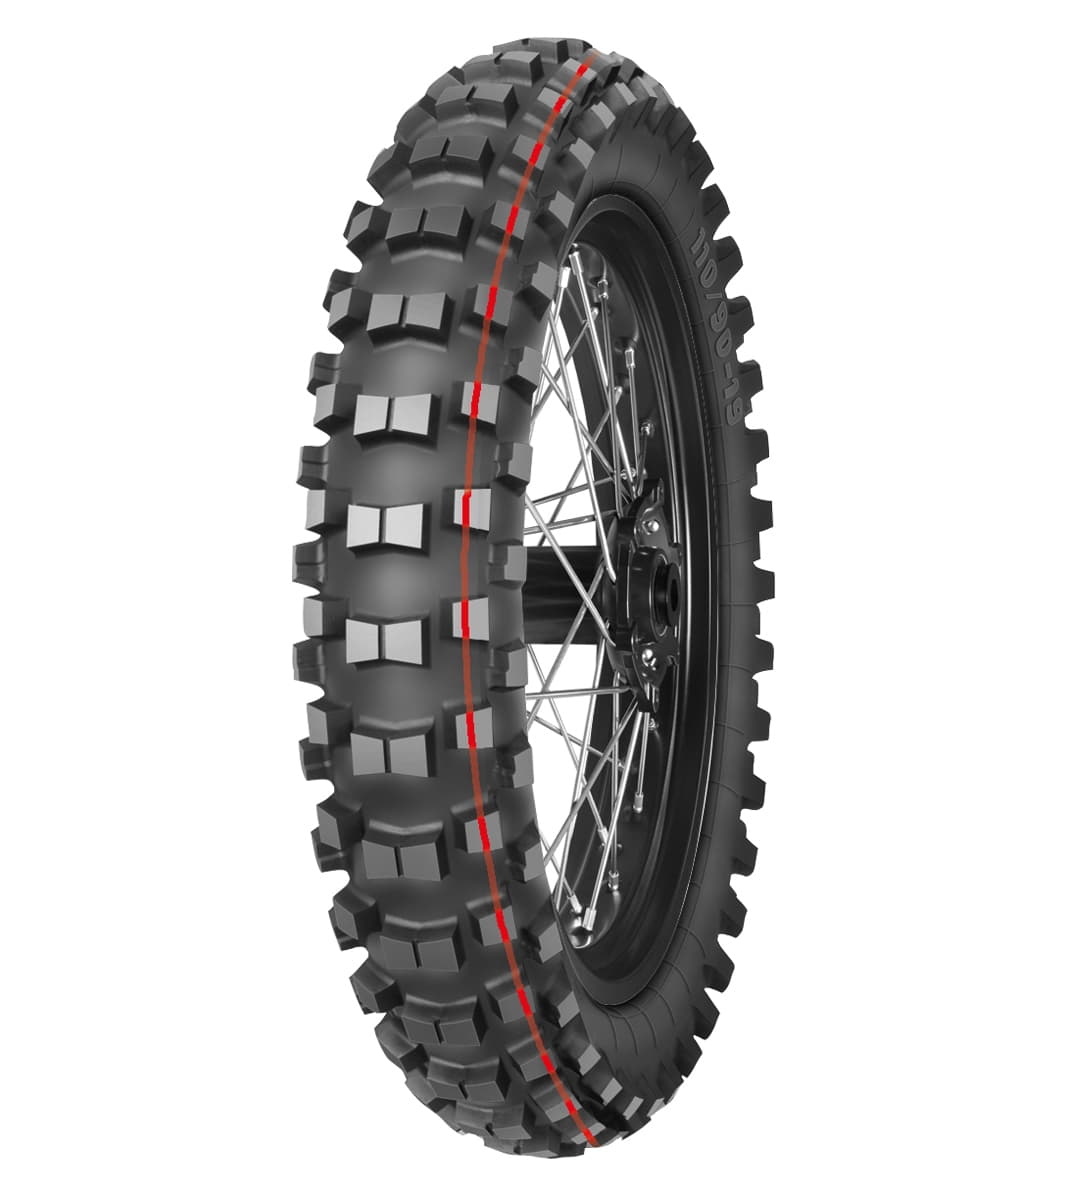 Mitas C-20 STONE KING 80/100-12 Pitcross Off-Road PIT CROSS 50M Red Tube Rear Tire Motorcycle Tires Mitas 